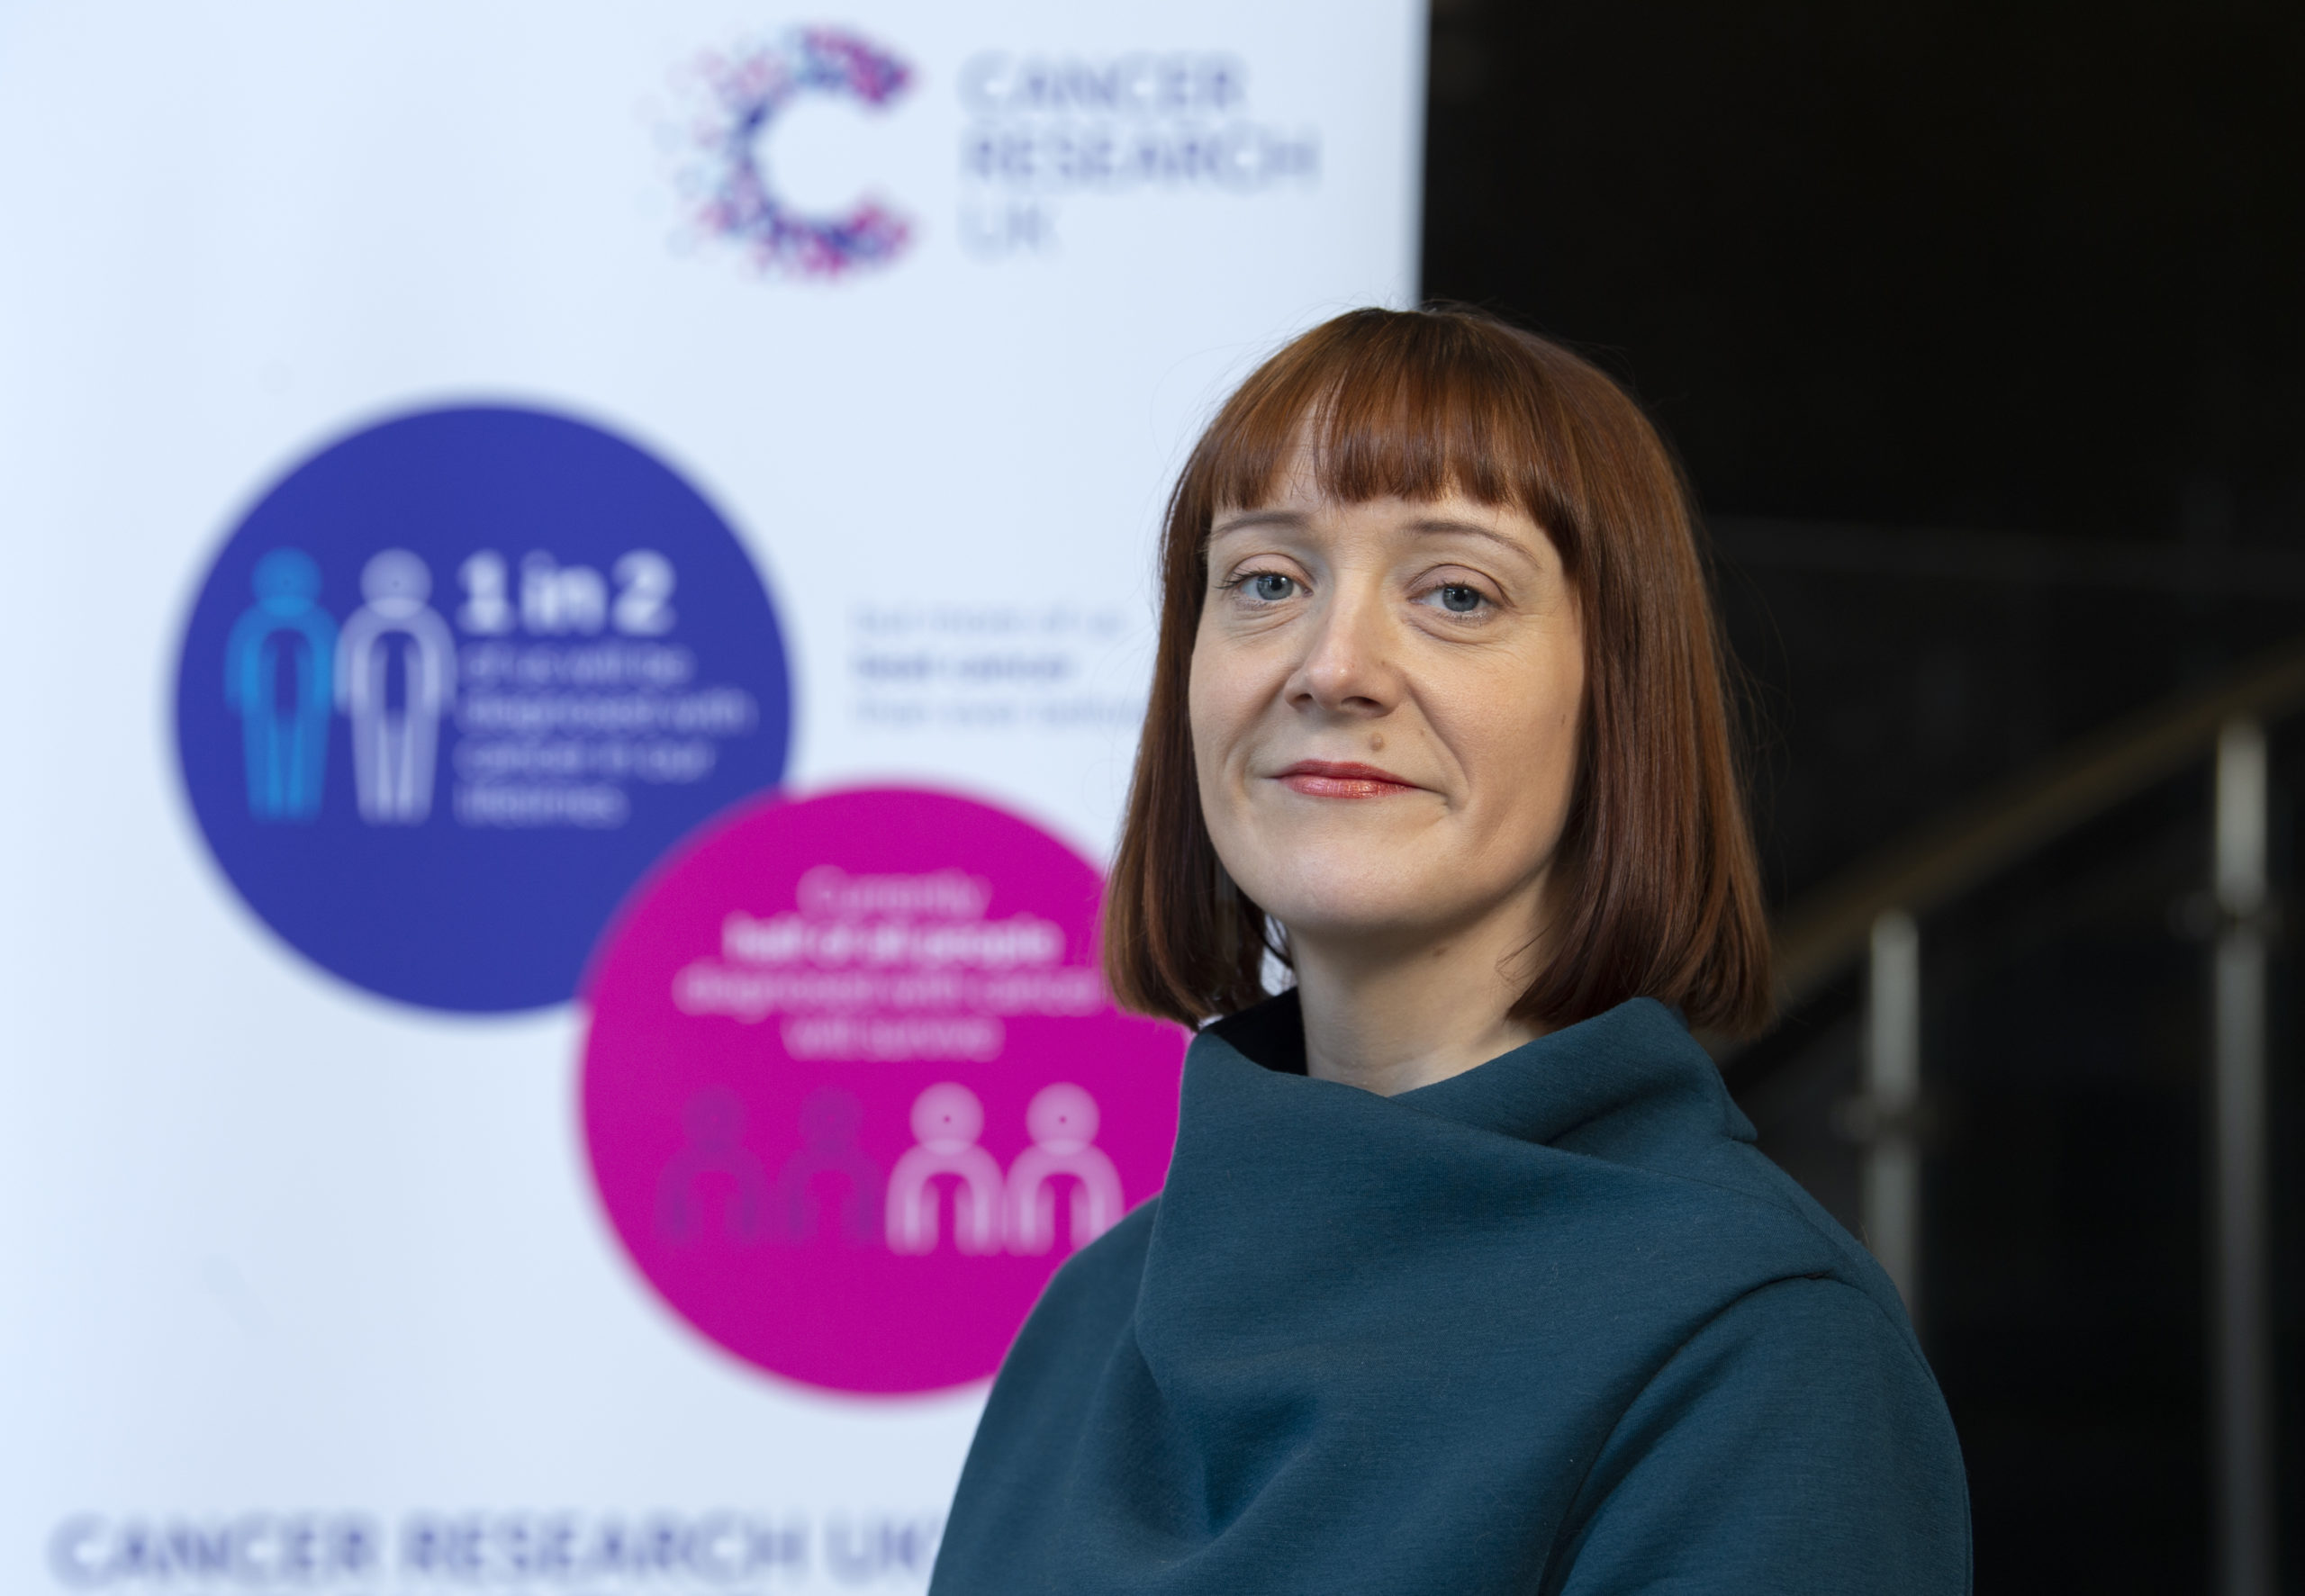 Campaign: Cancer Research UK's Marion O'Neill.